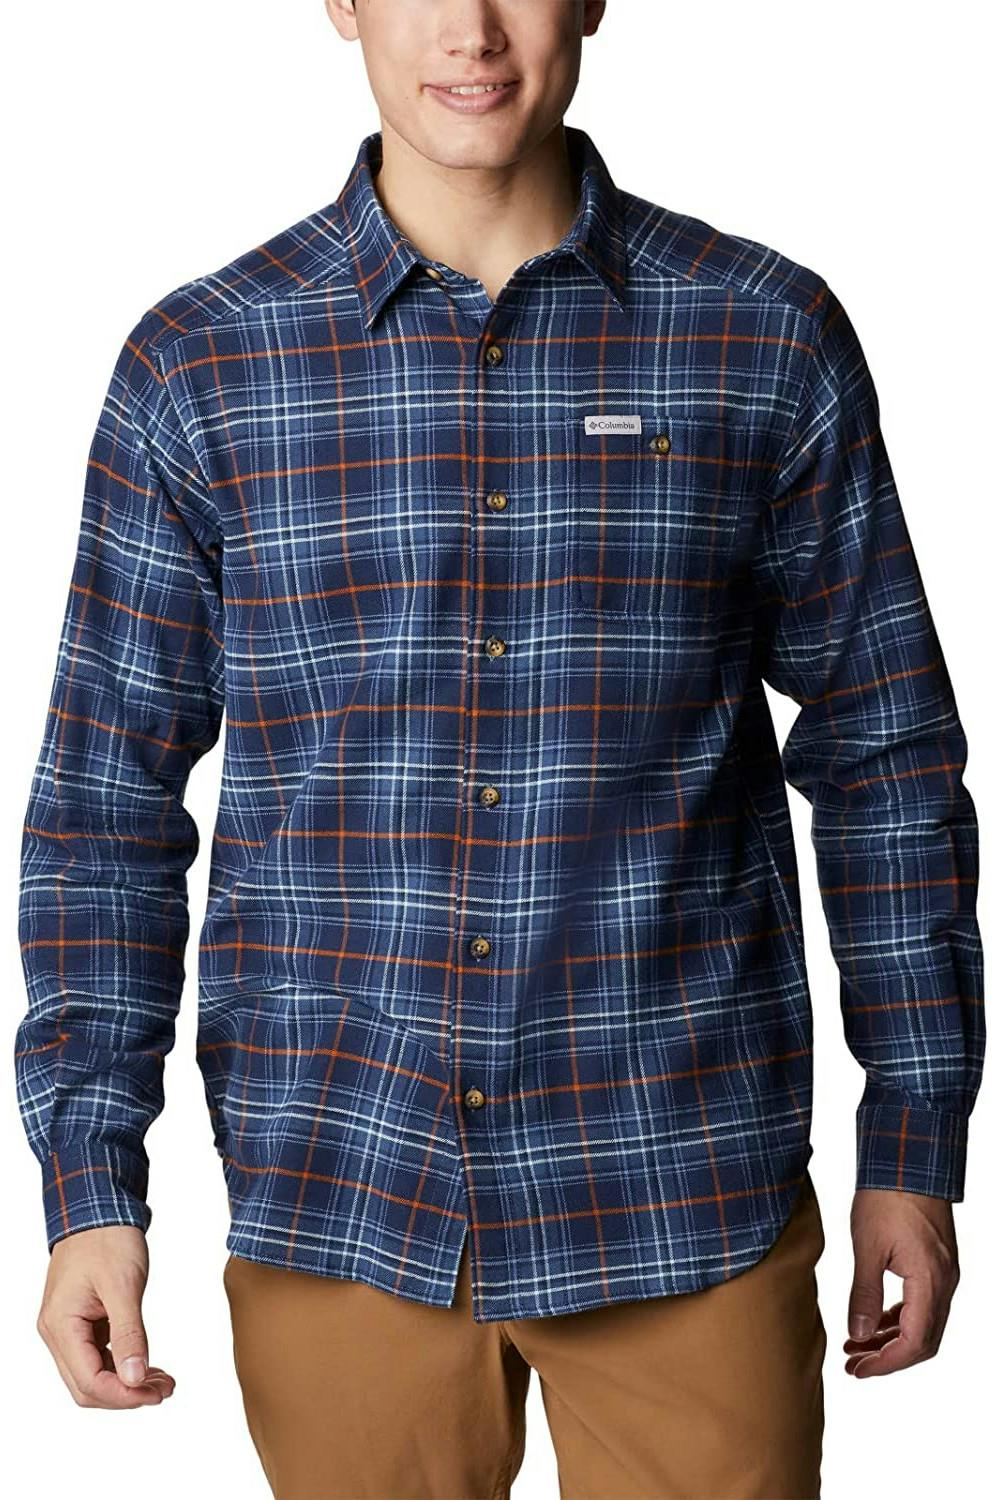 Columbia - Mens Cornell Woods Flannel Long Sleeve - MD Dark Mountain M